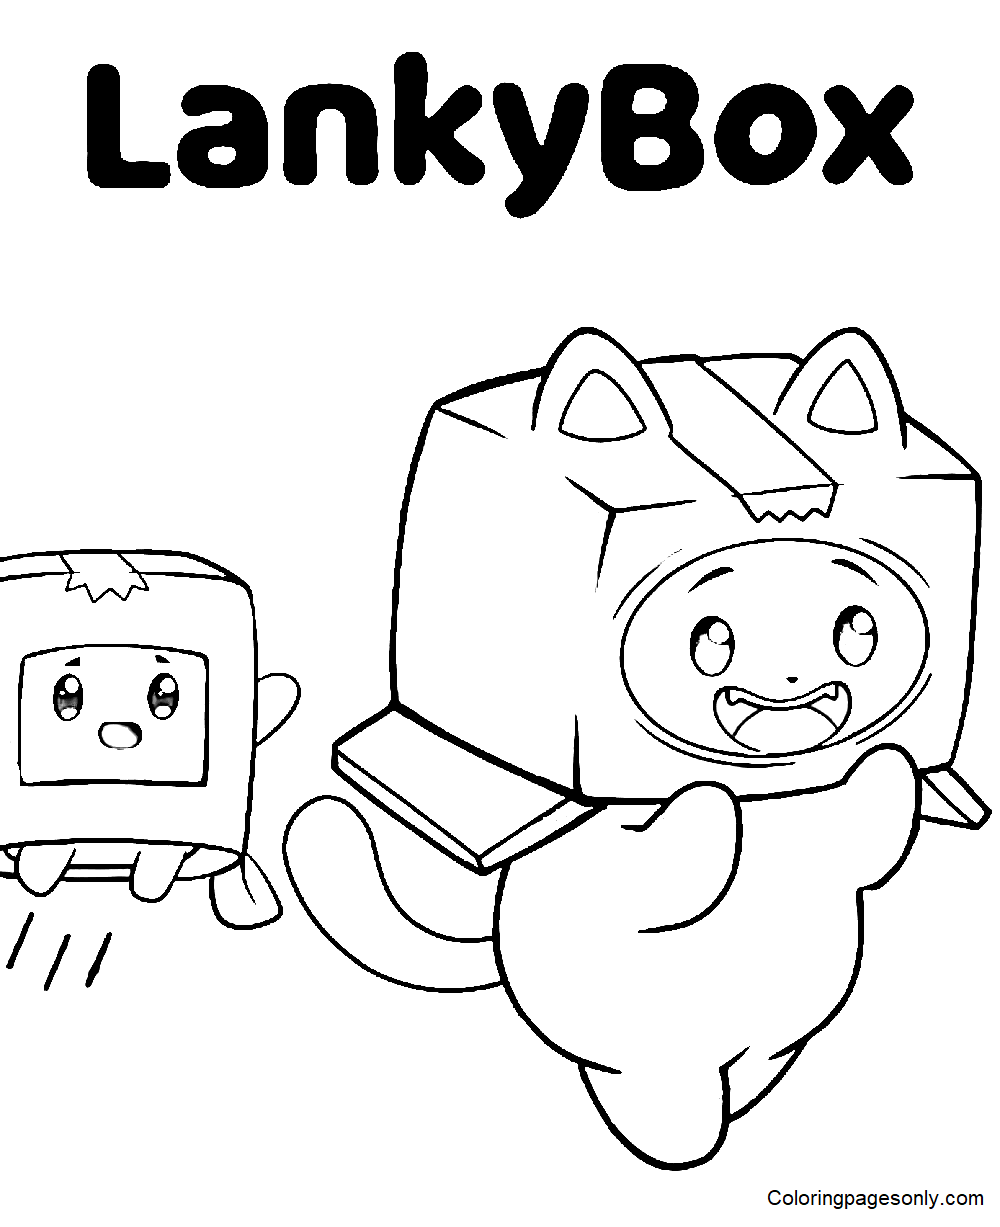 Printable LankyBox Sheets Coloring Pages